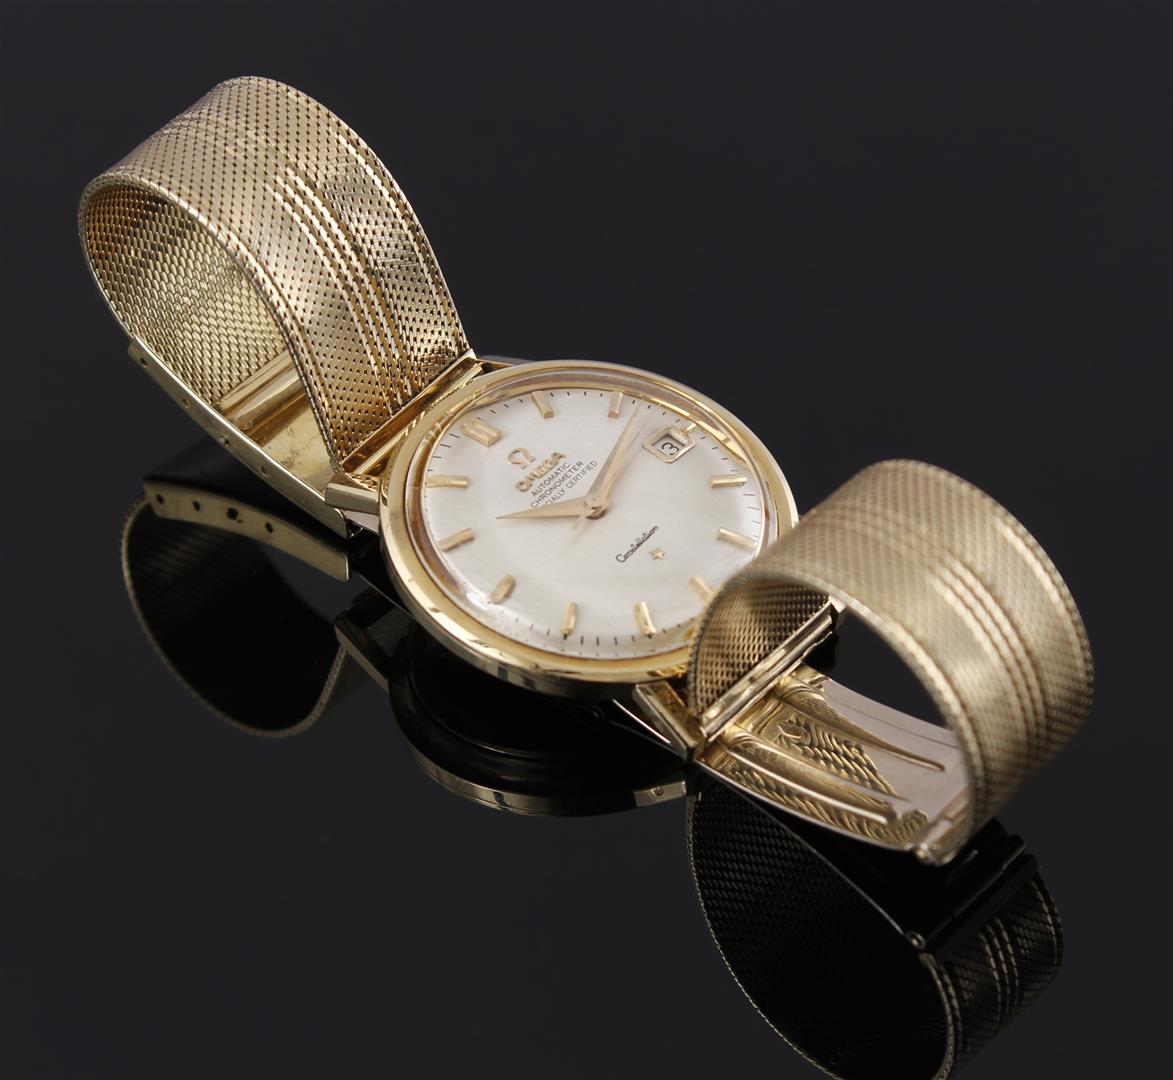 Omega Constellation wristwatch - Image 2 of 3